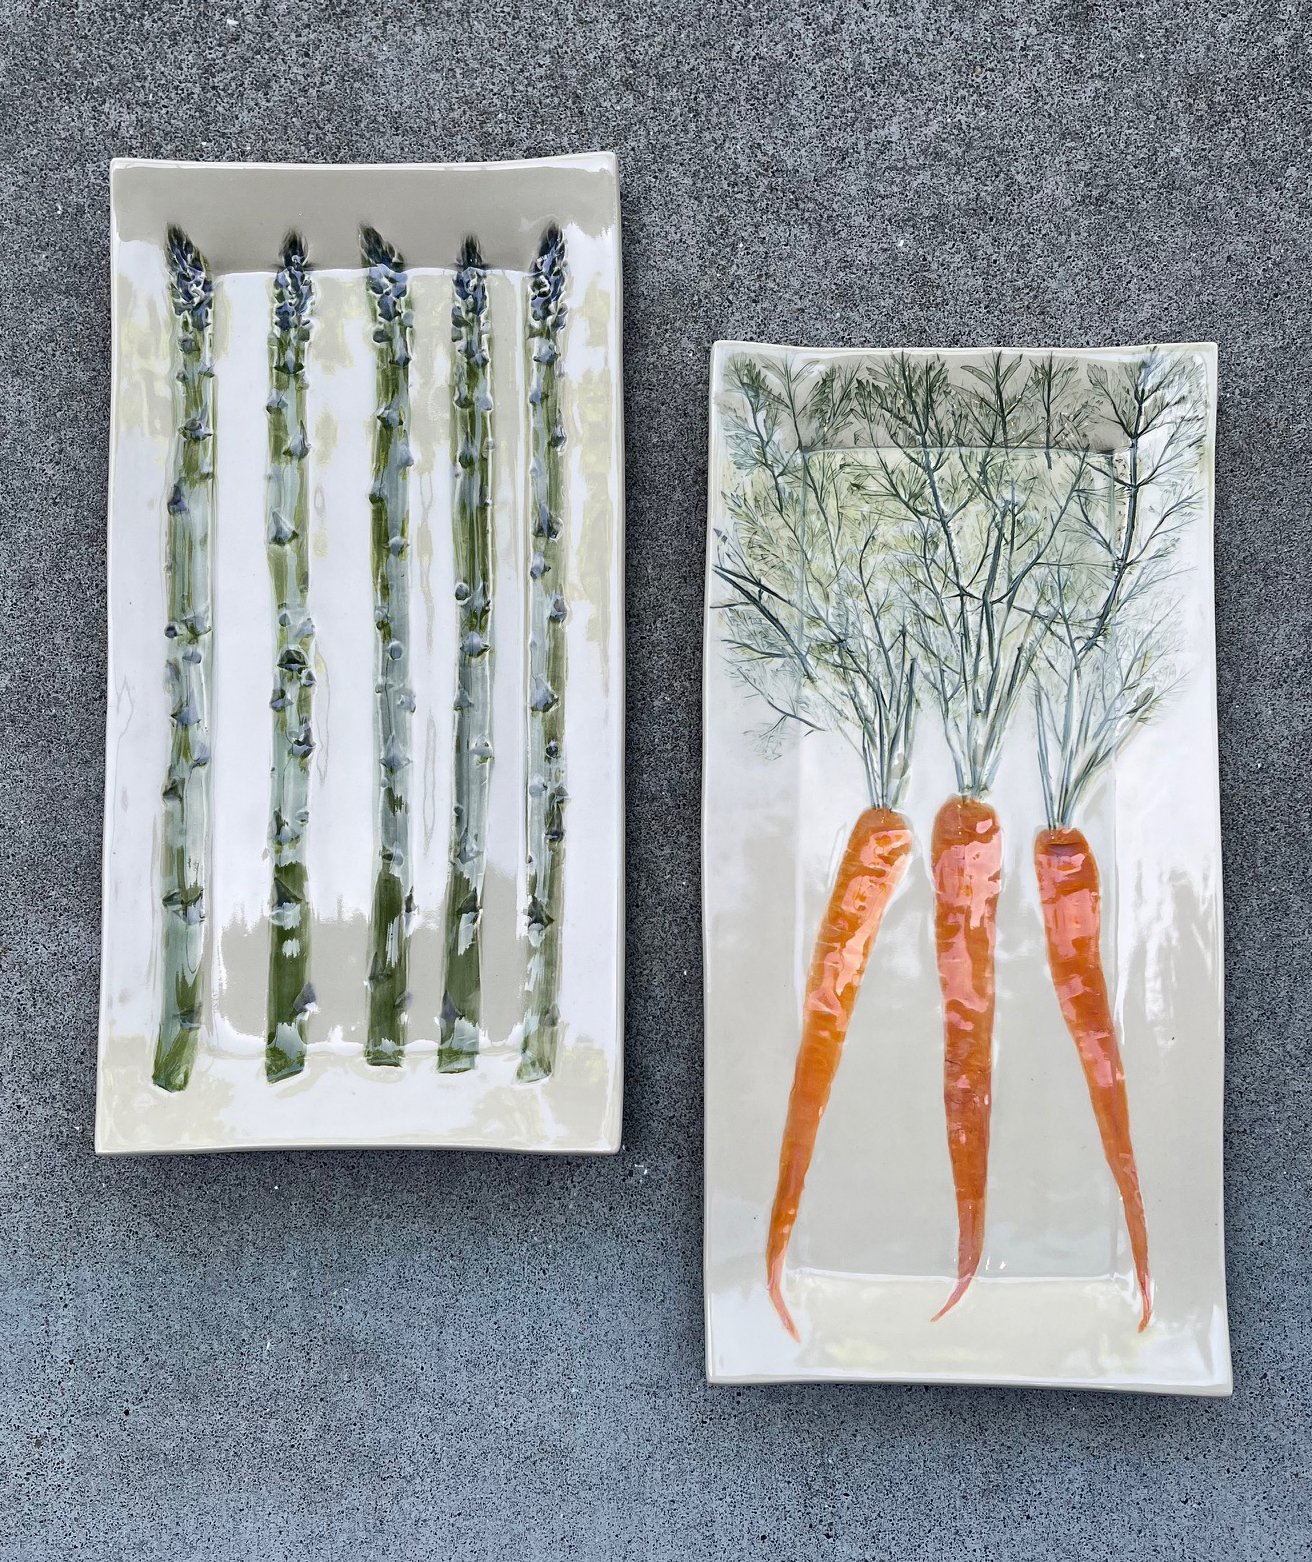 Carrot and Asparagus Platters by Lorna Newlin